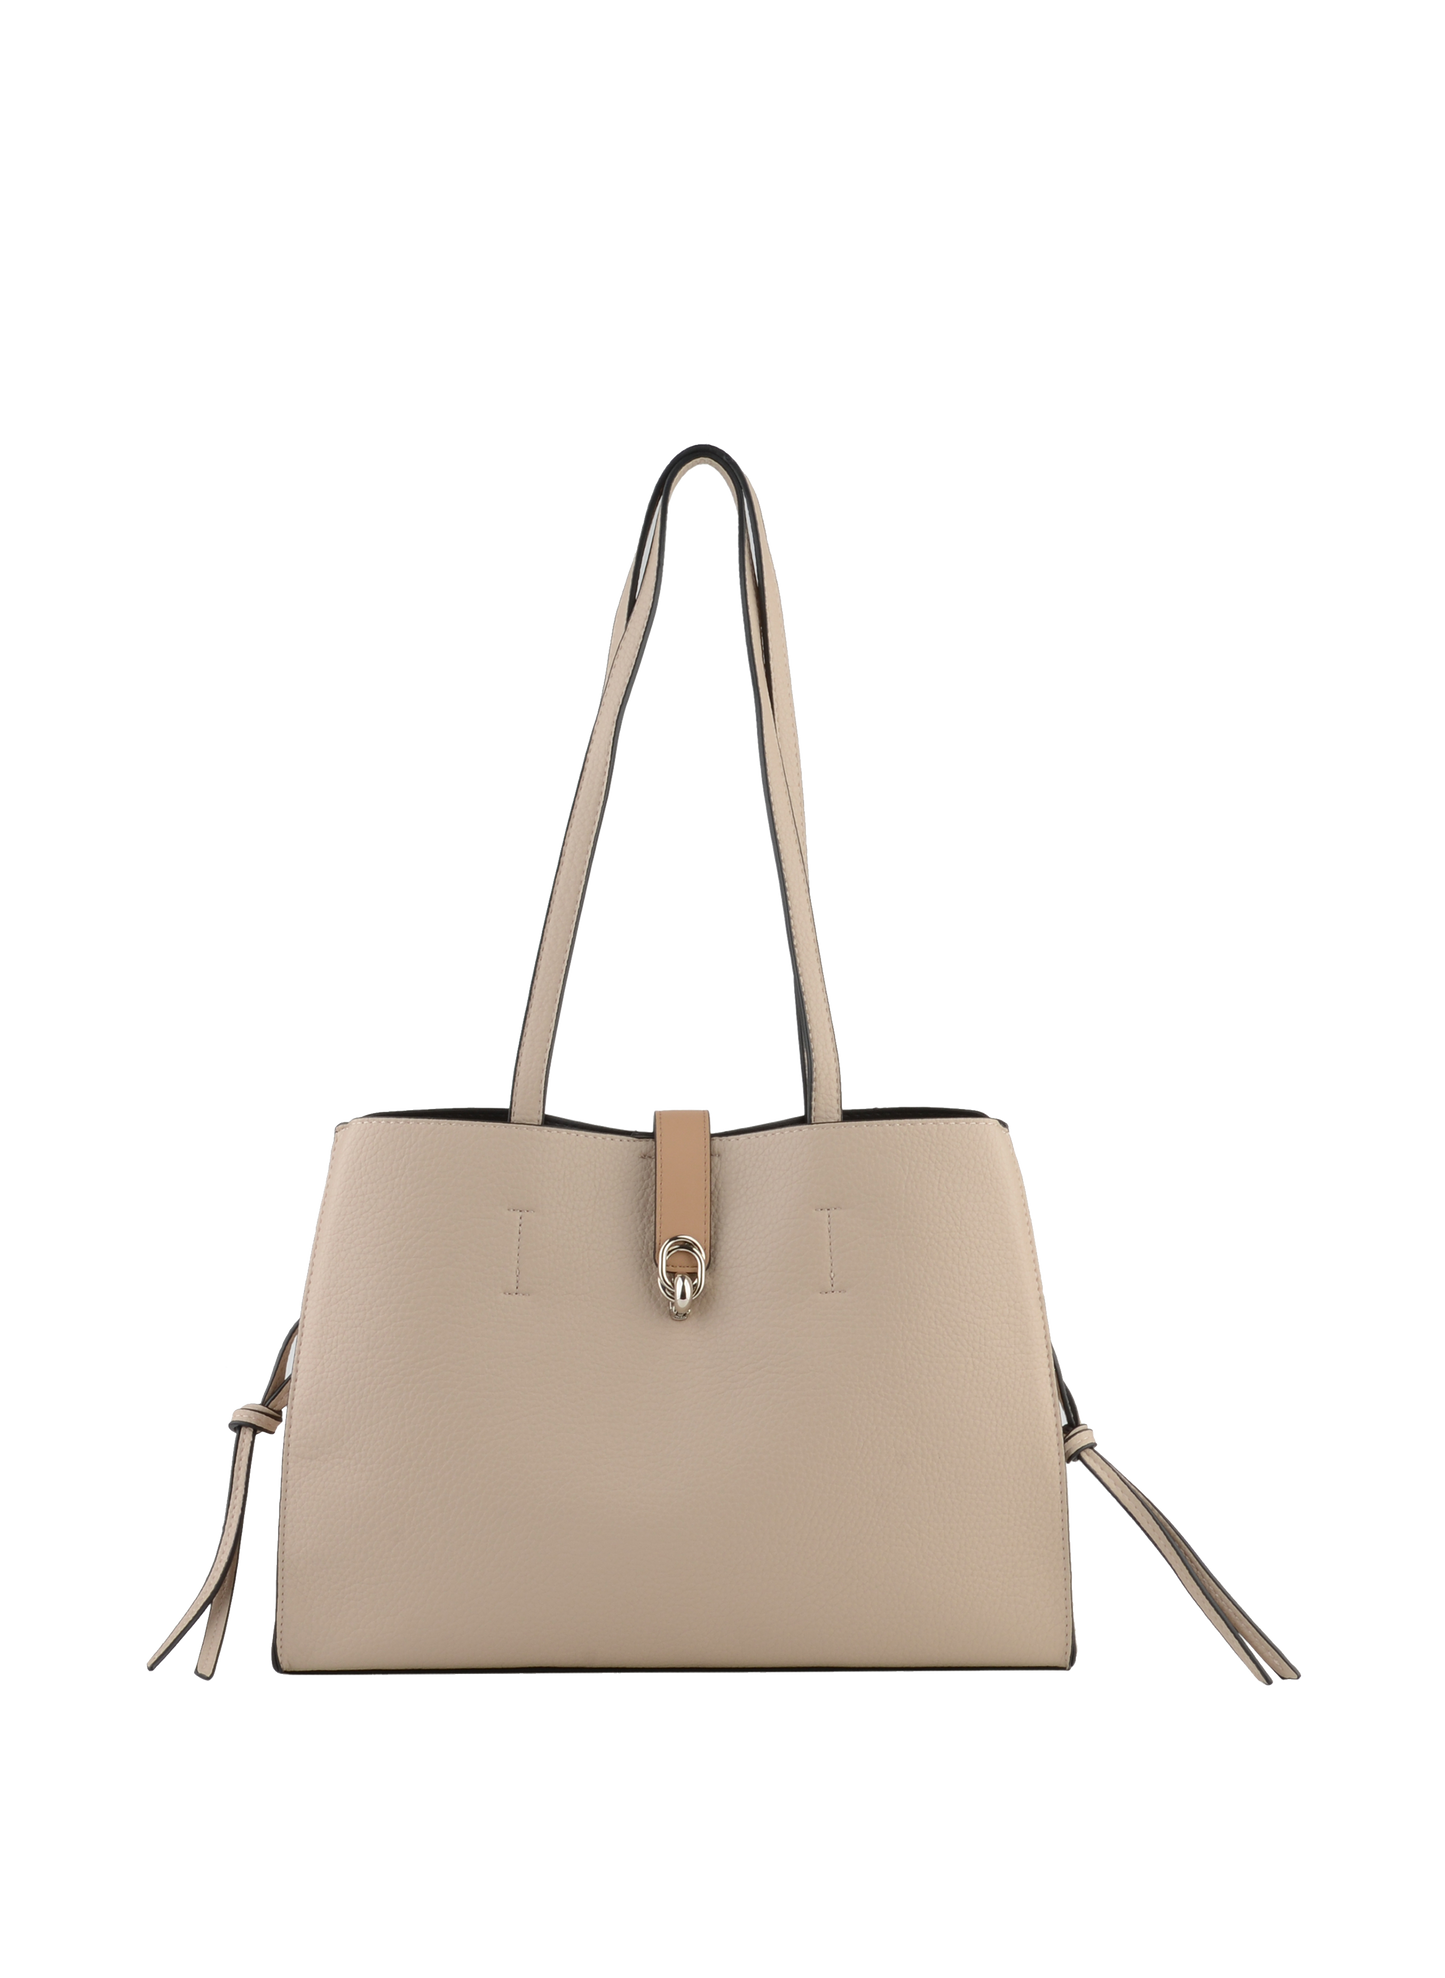 Isabelle - Sac shopping Beige/Taupe